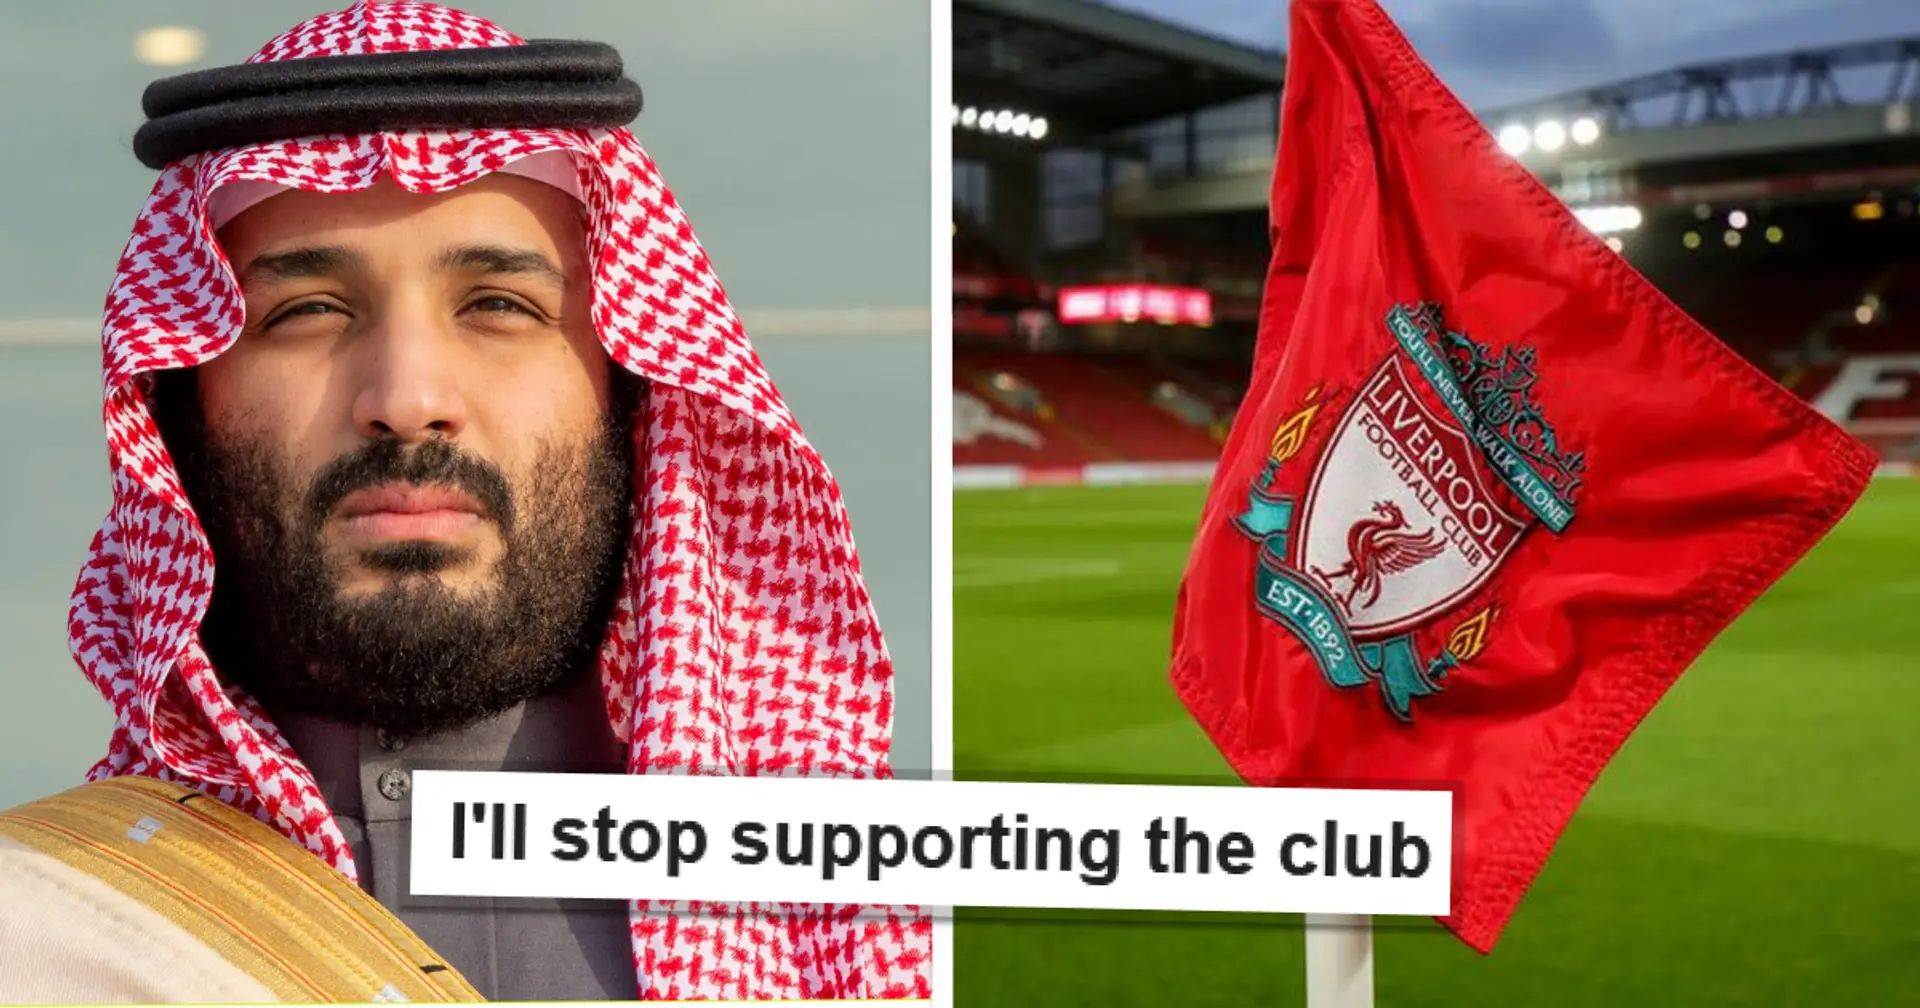 'I would hate it': Some Liverpool fans not happy as Saudi-Qatari investors set to take over club